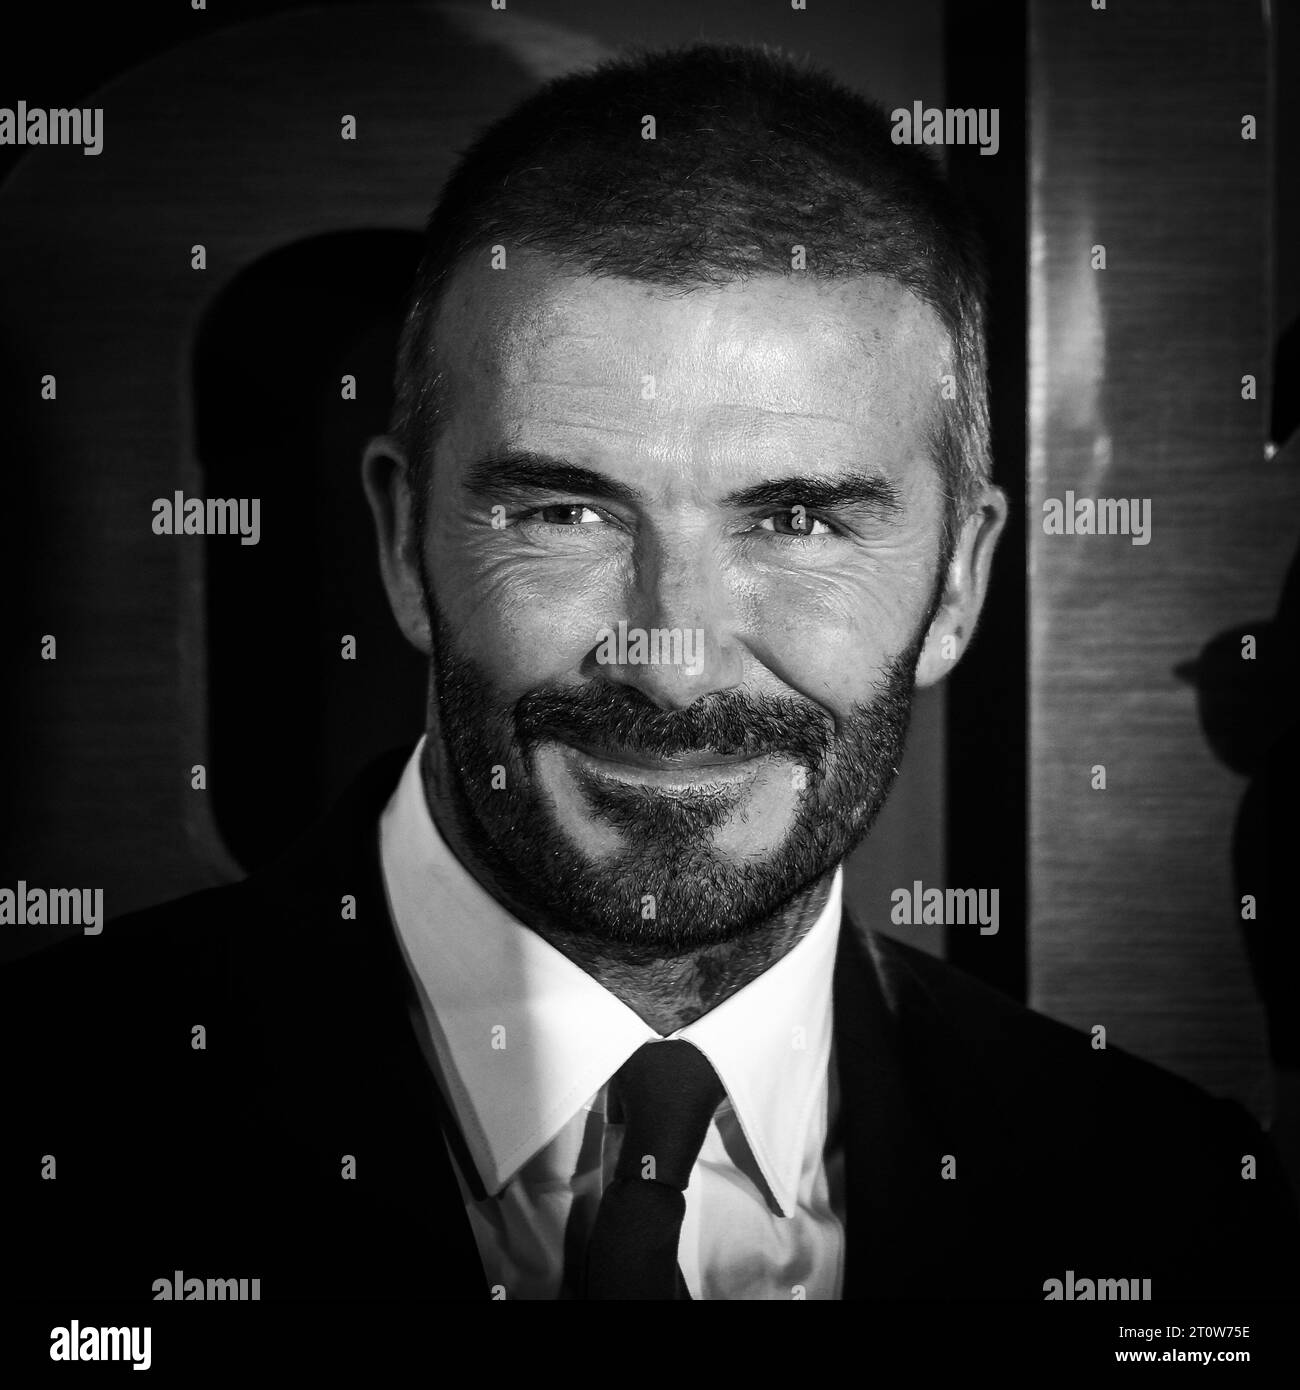 David Beckham photographed during the Premeire of Beckham Documentary at Curzon Mayfair in London, UK on 3 October 2023 . Picture by Julie Edwards. Stock Photo